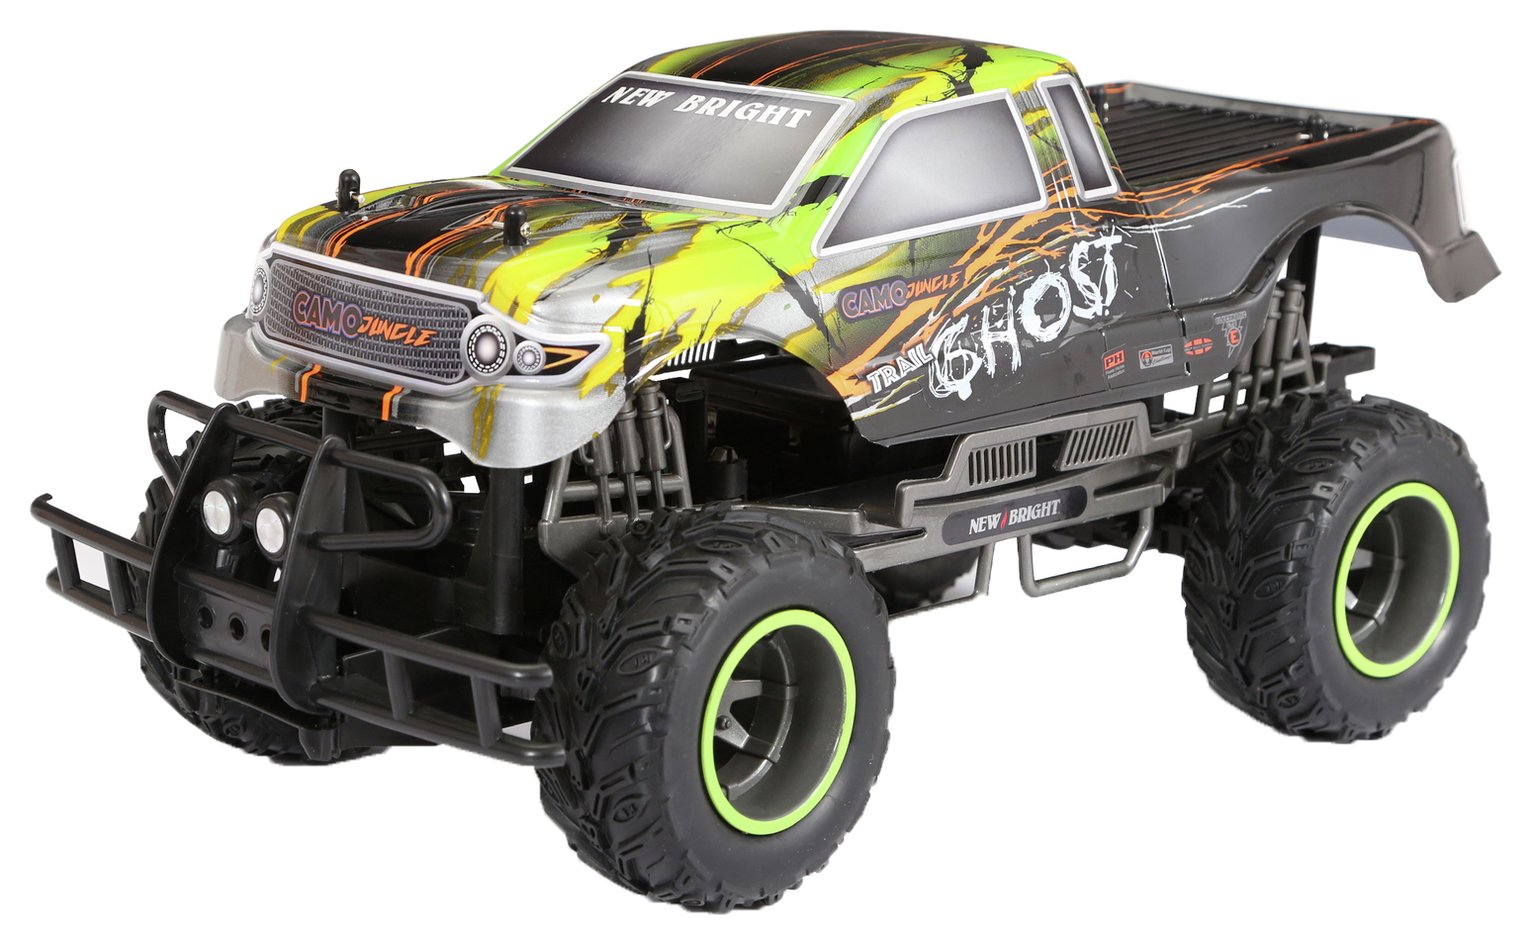 New Bright 1:10 Chargers Trail Ghost Remote Controlled Truck